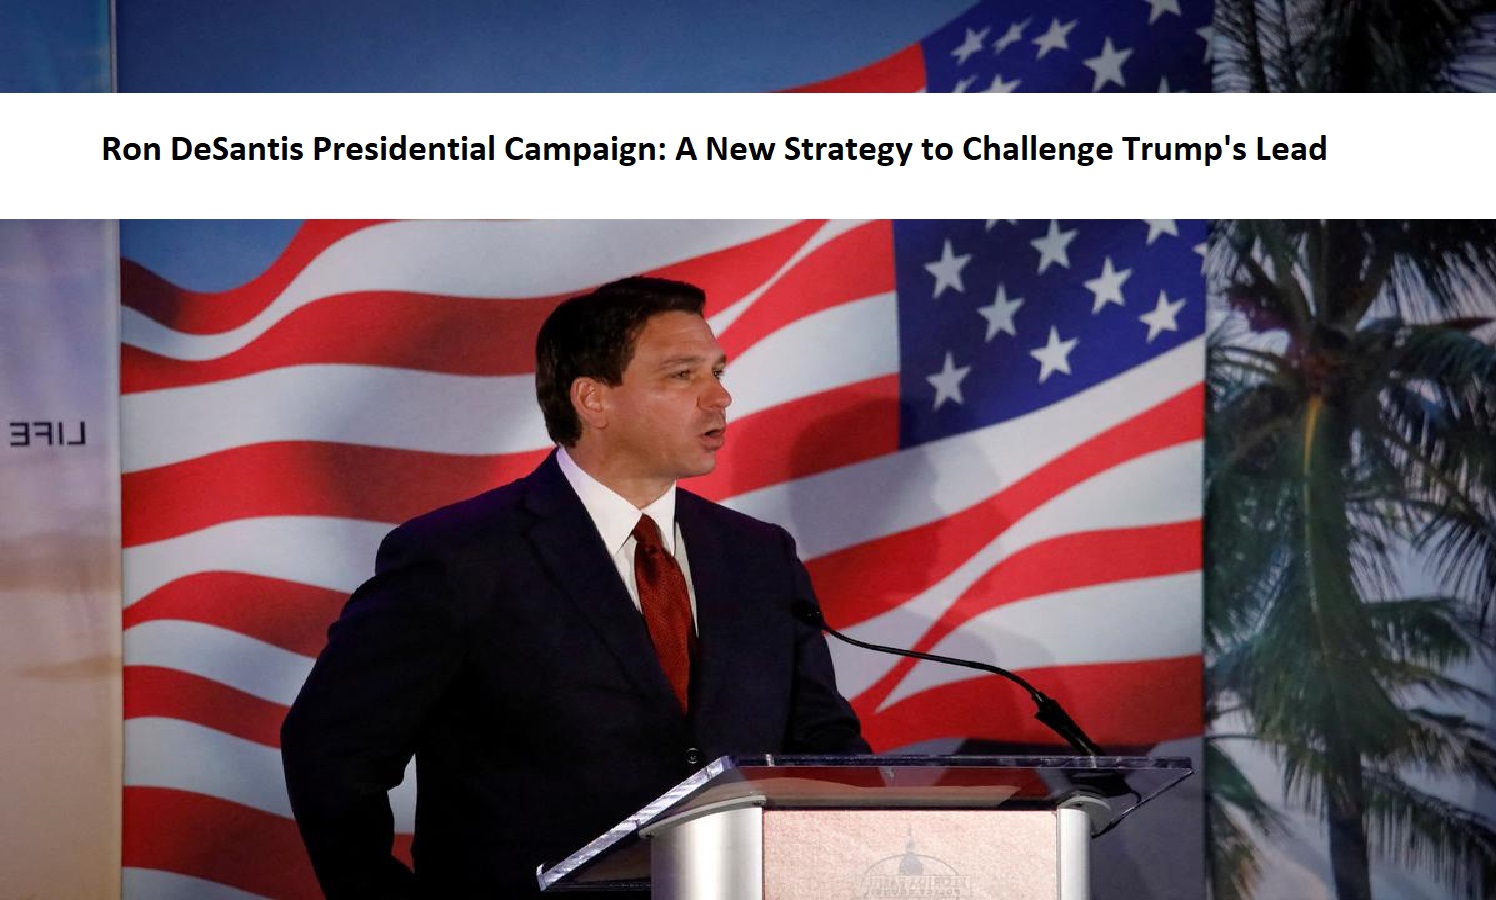 ron-desantis-presidential-campaign-a-new-strategy-to-challenge-trumps-l